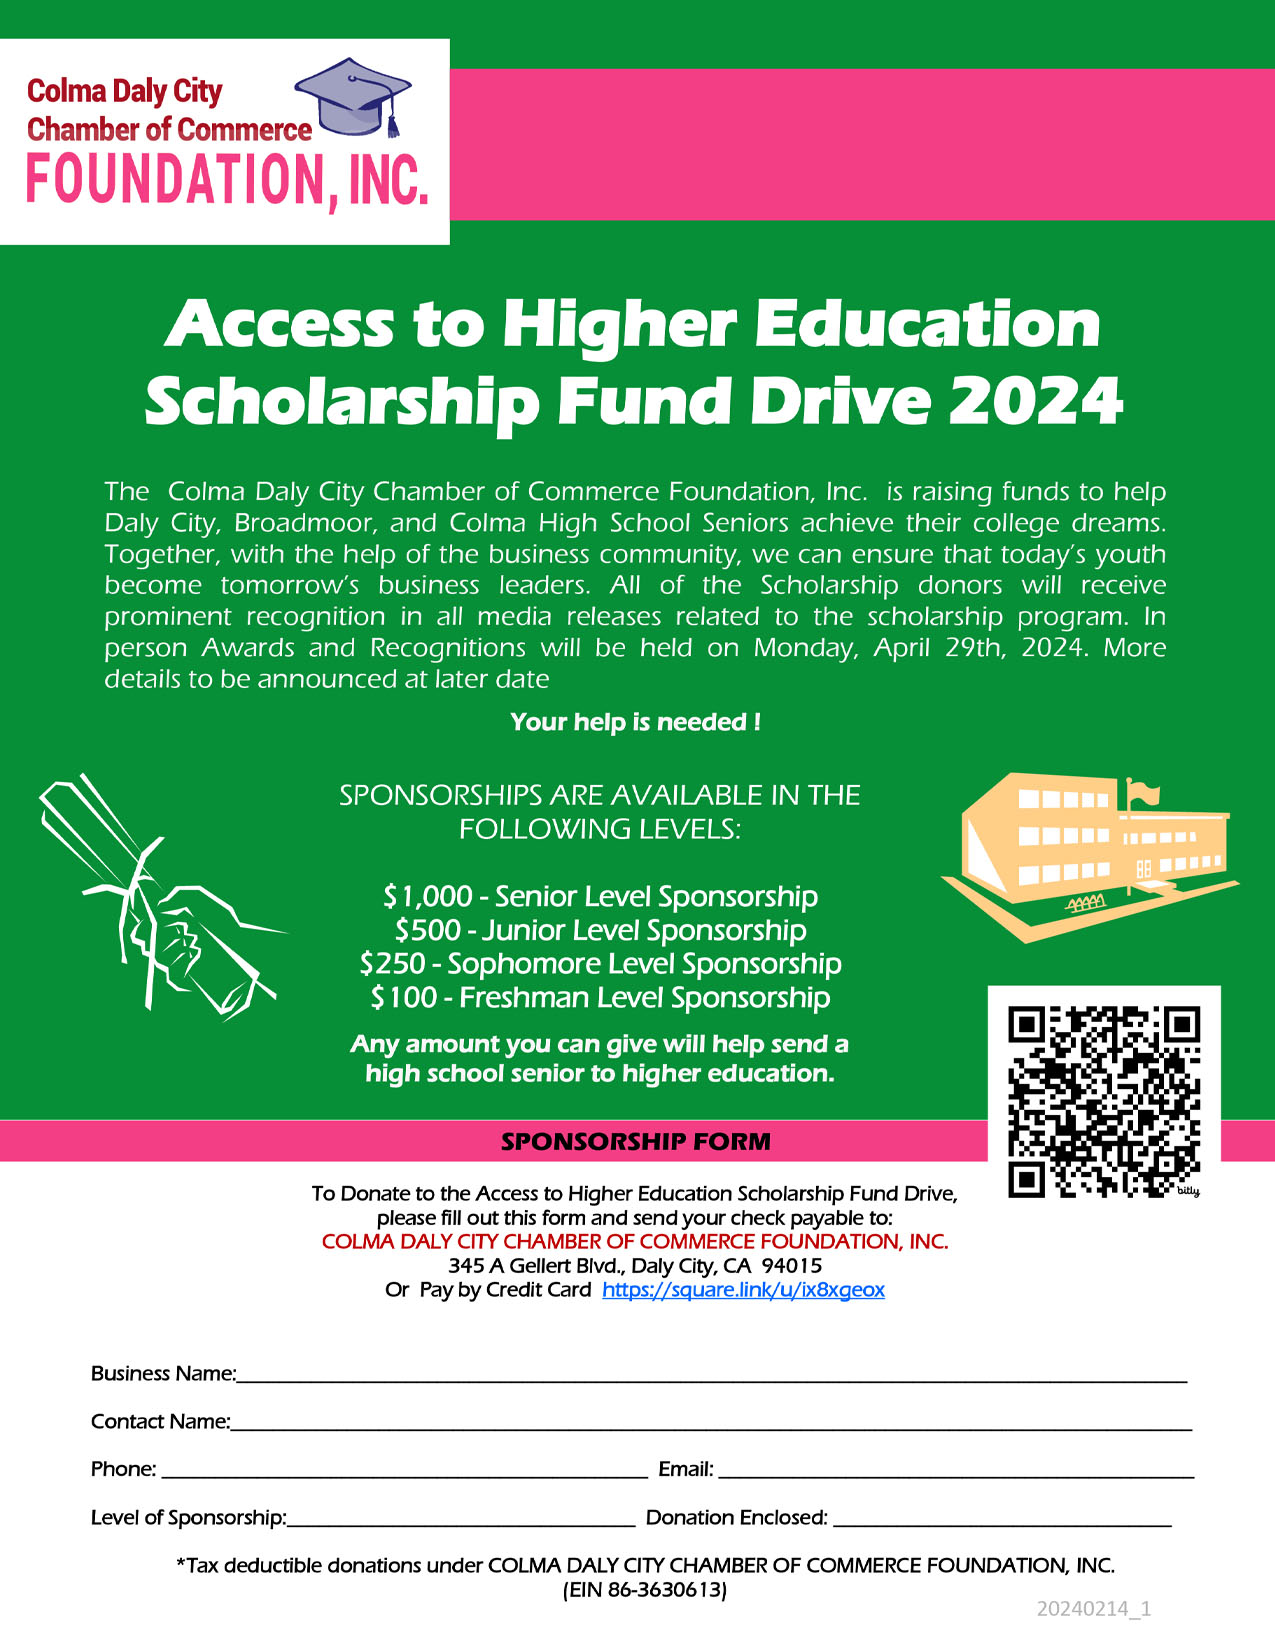 Access to Higher Education Scholarship Fund Drive 2024 donation form